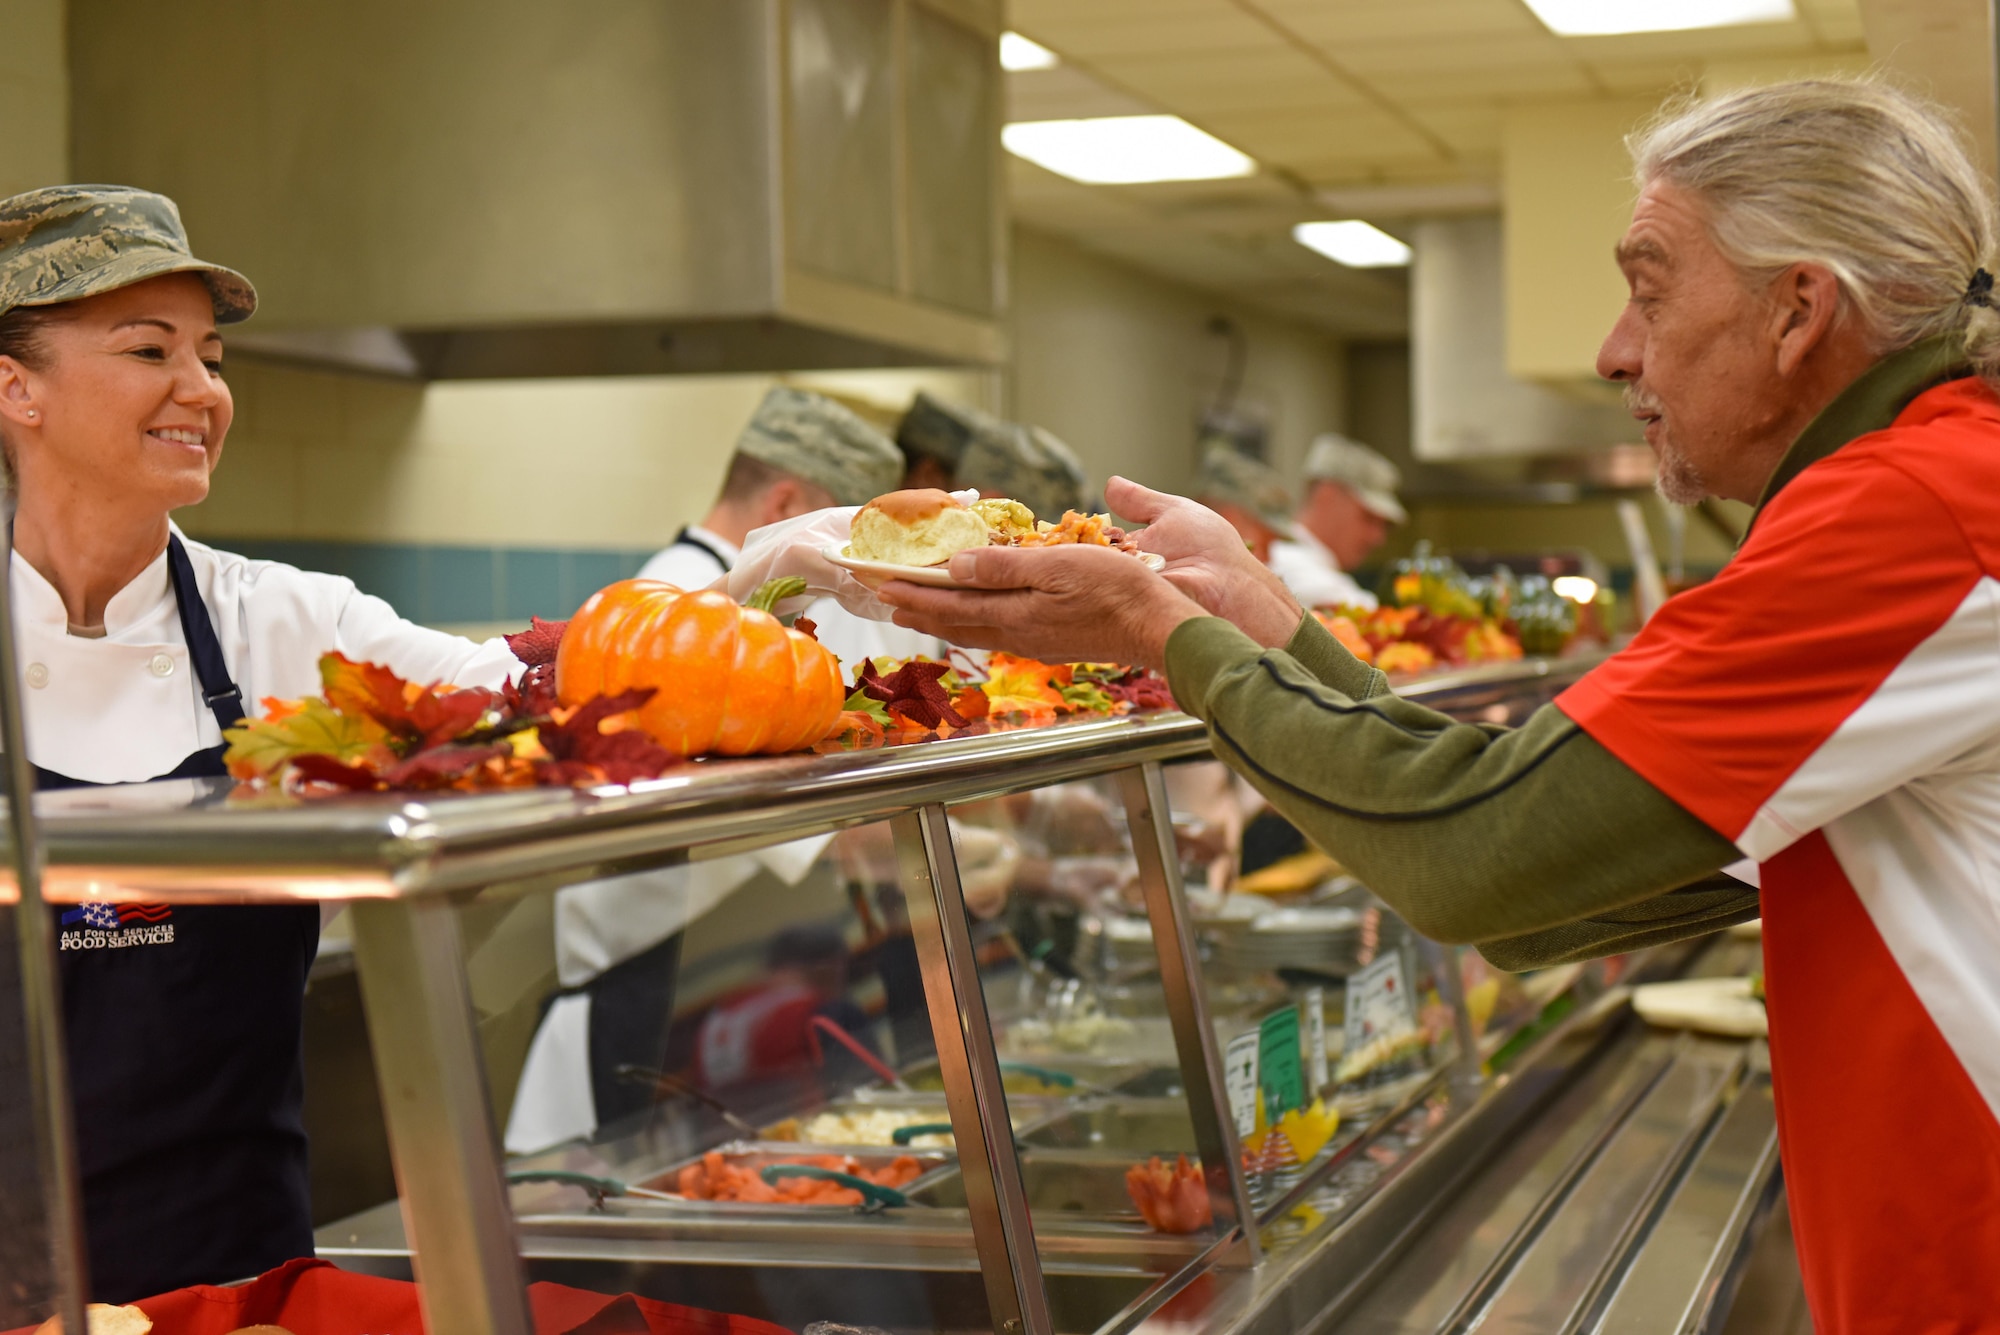 Senior Master Sgt. Tammy Moore, 4th Comptroller Squadron superintendent, hands a Red Cross volunteer a plate of food at the dining facility at Seymour Johnson Air Force Base, North Carolina, Nov. 24, 2016. Team Seymour leadership and 4th Force Support Squadron Airmen gave back to the Red Cross volunteers and staff members by providing a tour of the base and serving a hot Thanksgiving meal. (U.S. Air Force photo by Airman 1st Class Ashley Williamson)